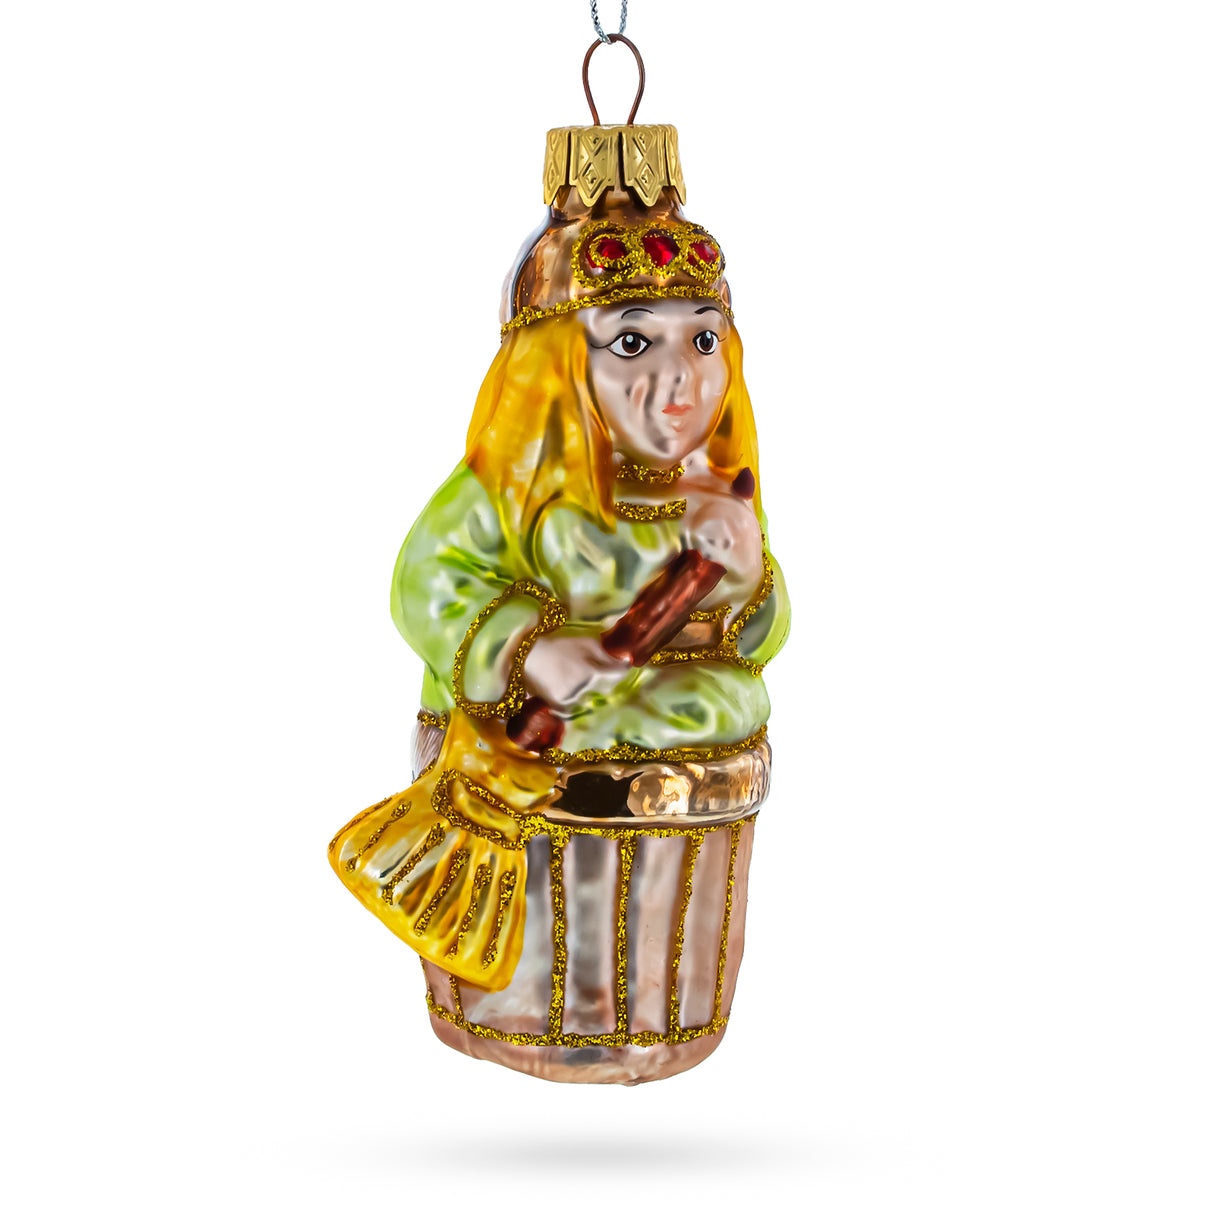 Glass Baba Yaga Folk Tale Character Glass Christmas Ornament in Multi color